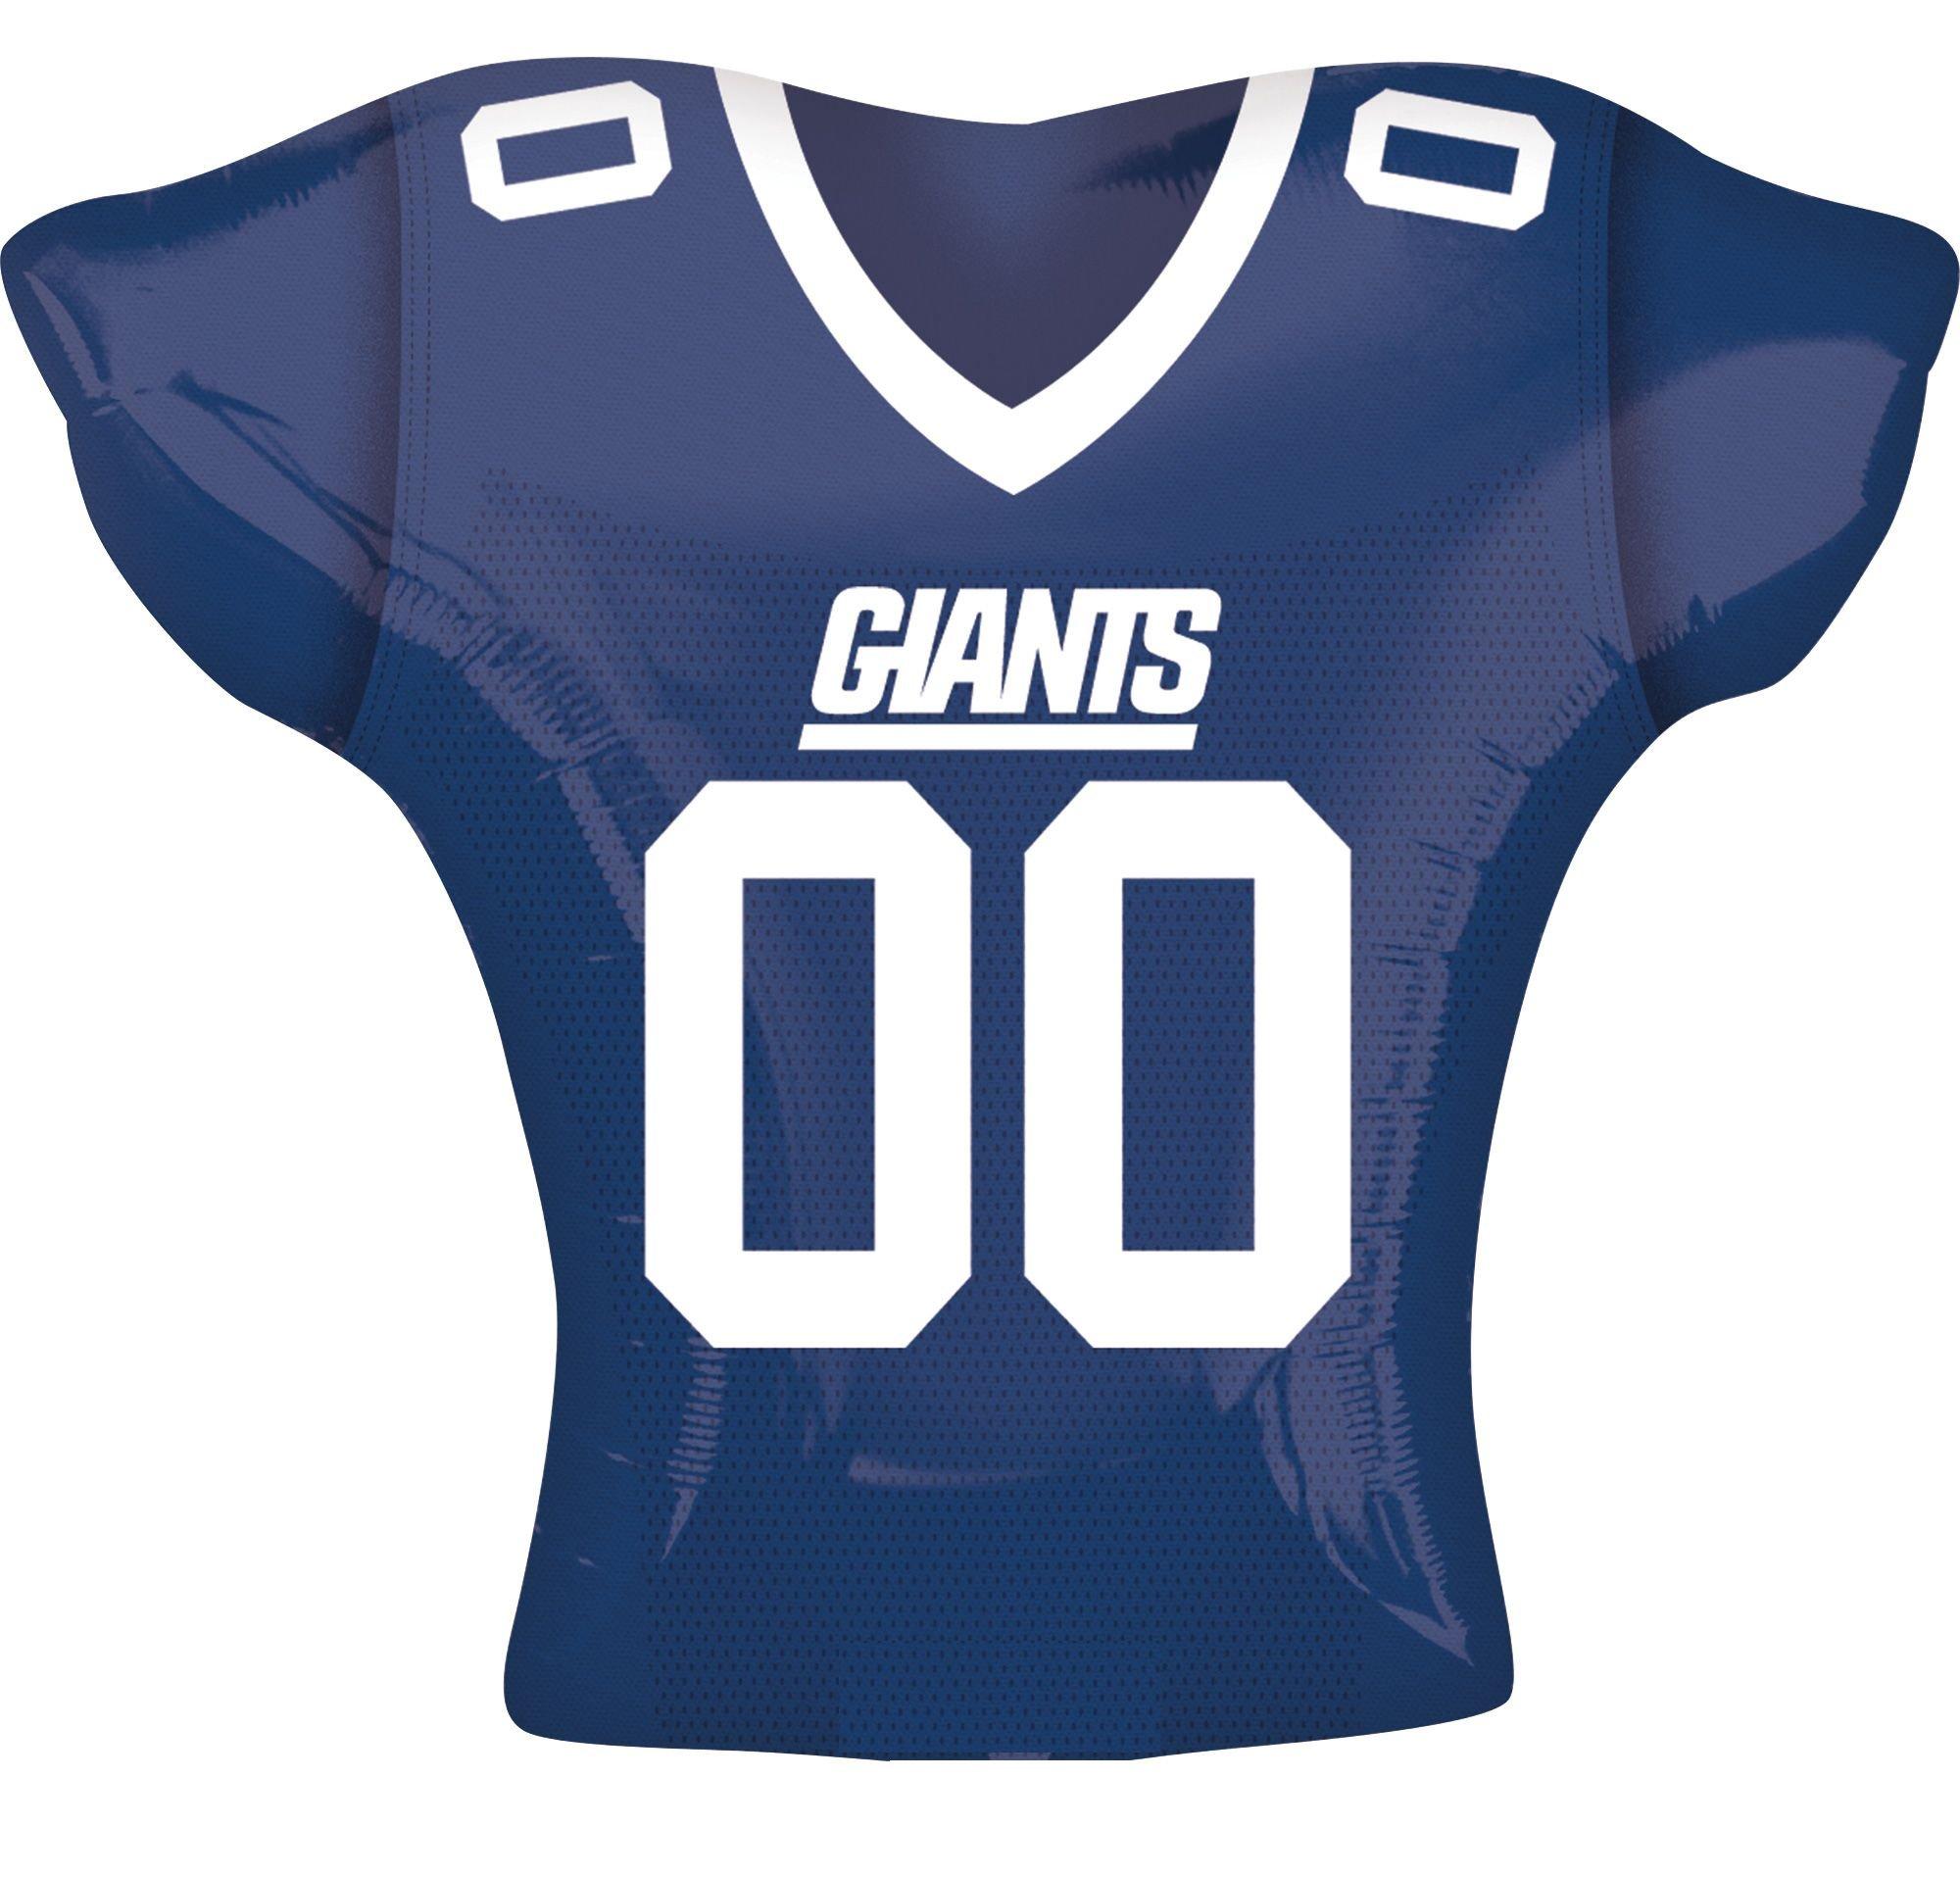 New York Giants Baseball Jersey Selected NY Giants Gifts - Personalized  Gifts: Family, Sports, Occasions, Trending